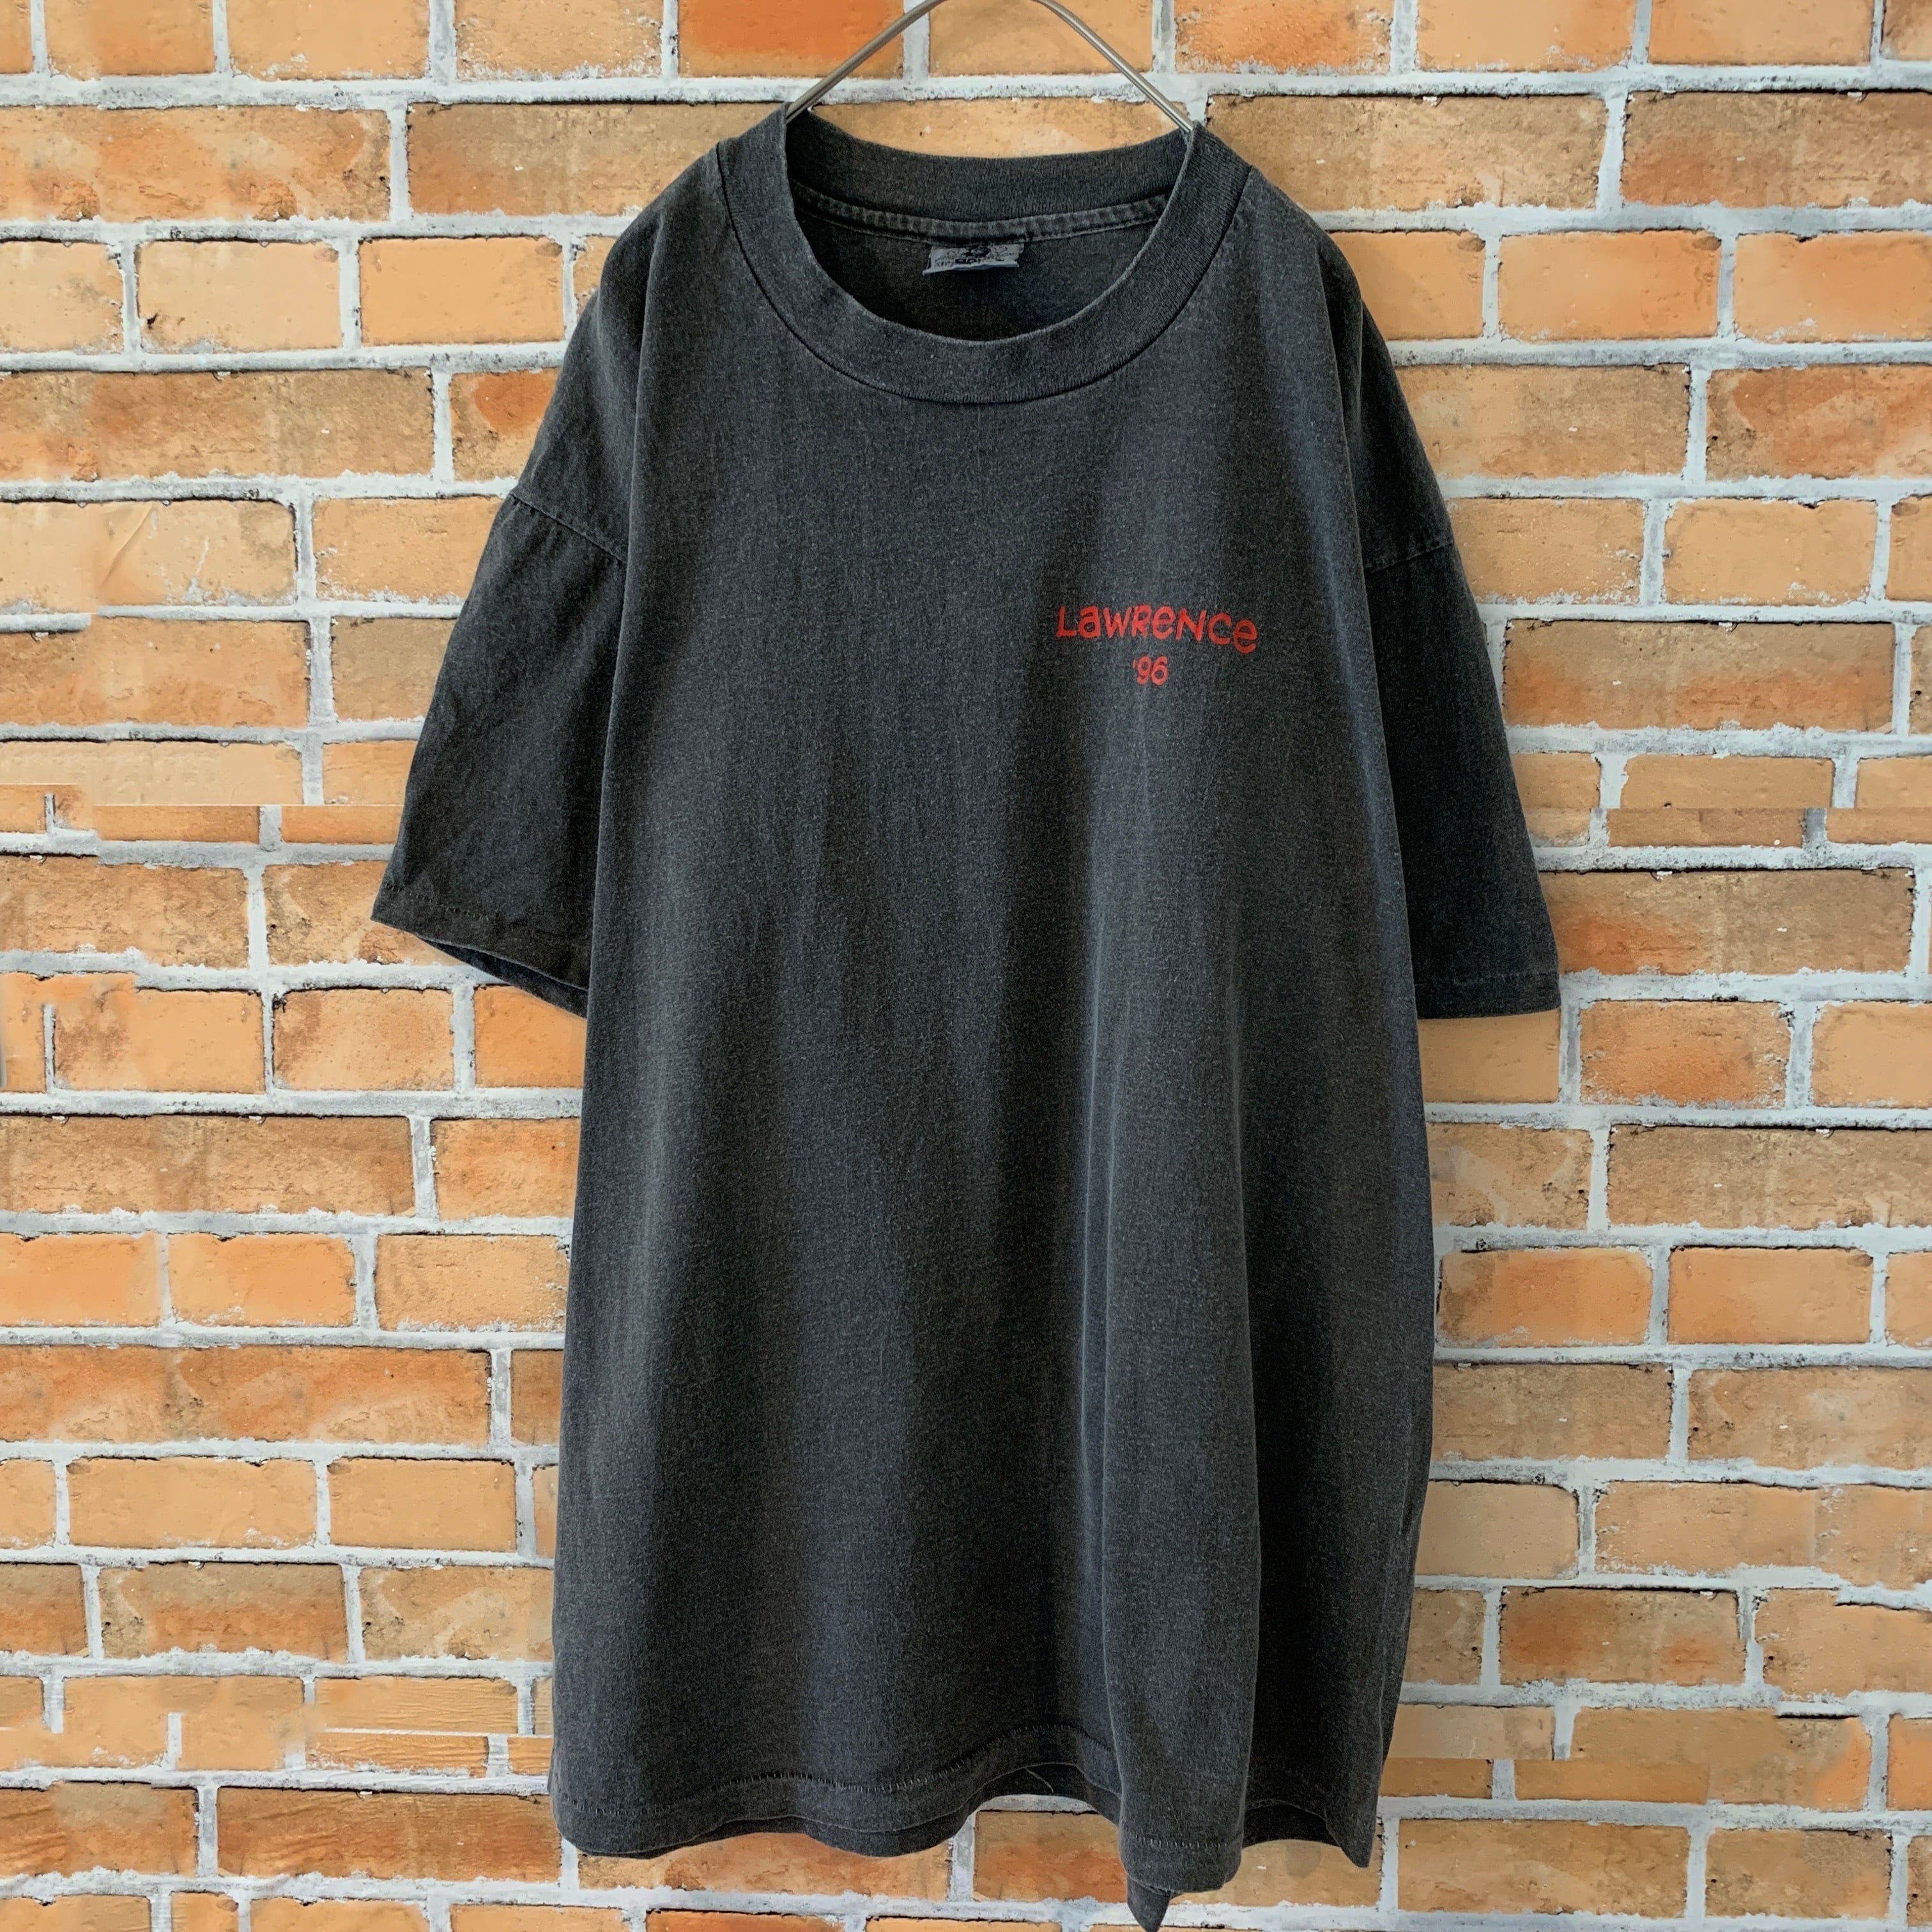 A3184　Tシャツ ブルー　ピンク　90s ヴィンテージ　アート